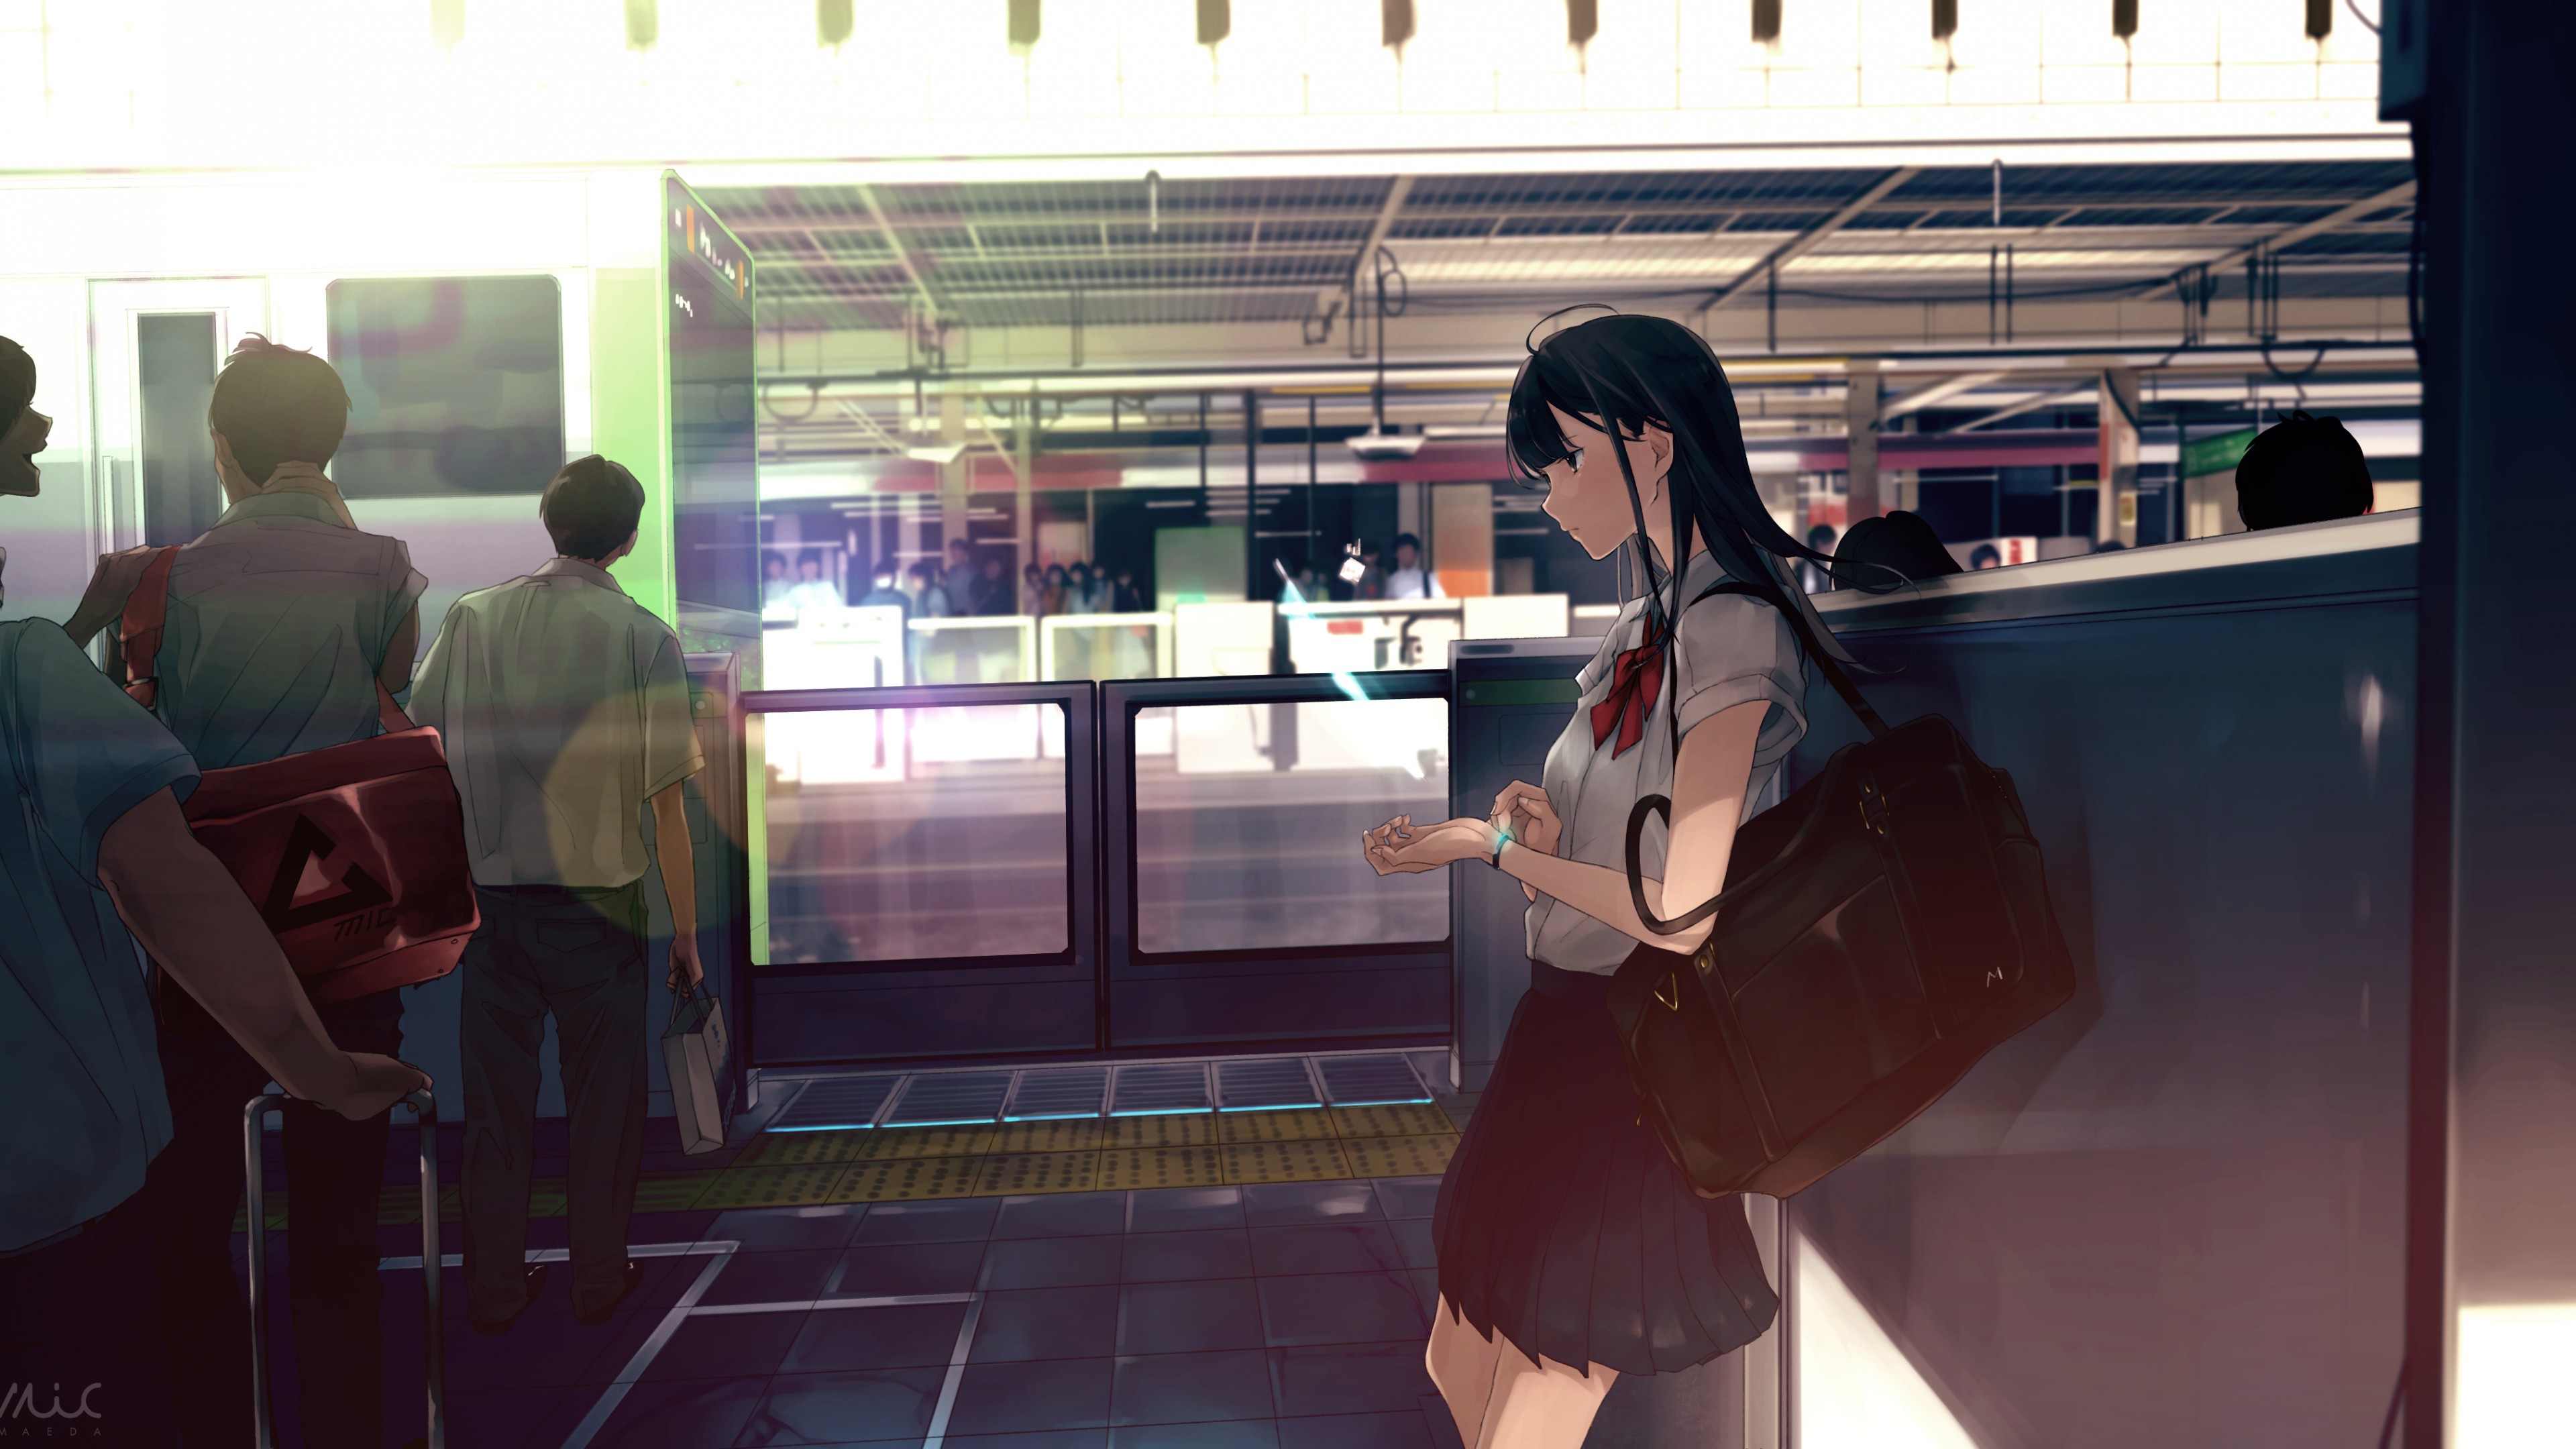 2k - Anime Girl At Airport , HD Wallpaper & Backgrounds